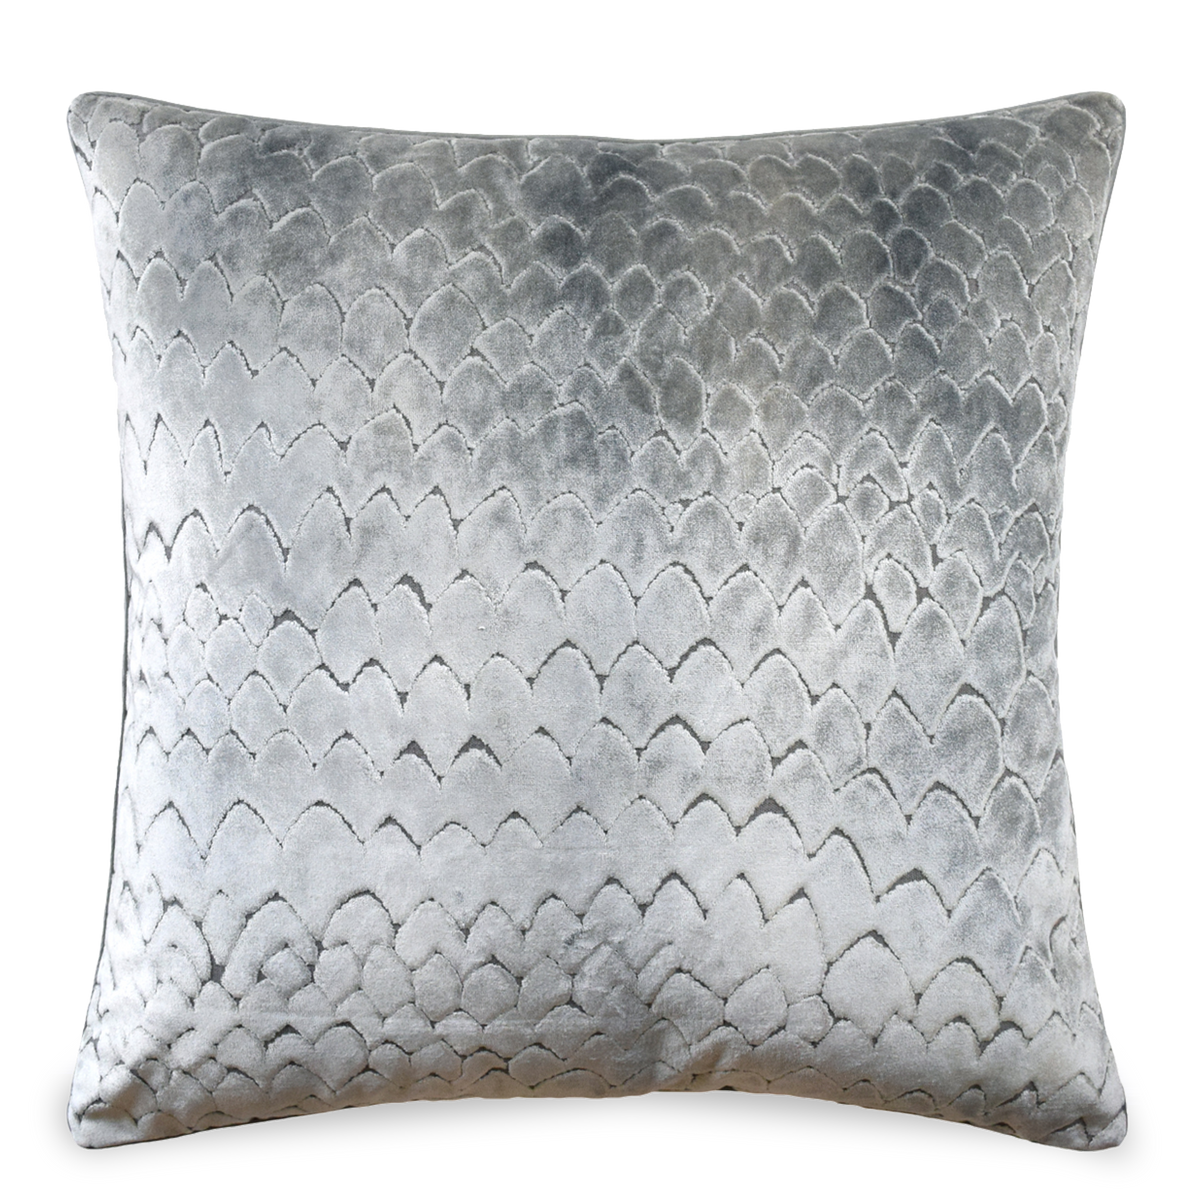 Moonscale Pillow